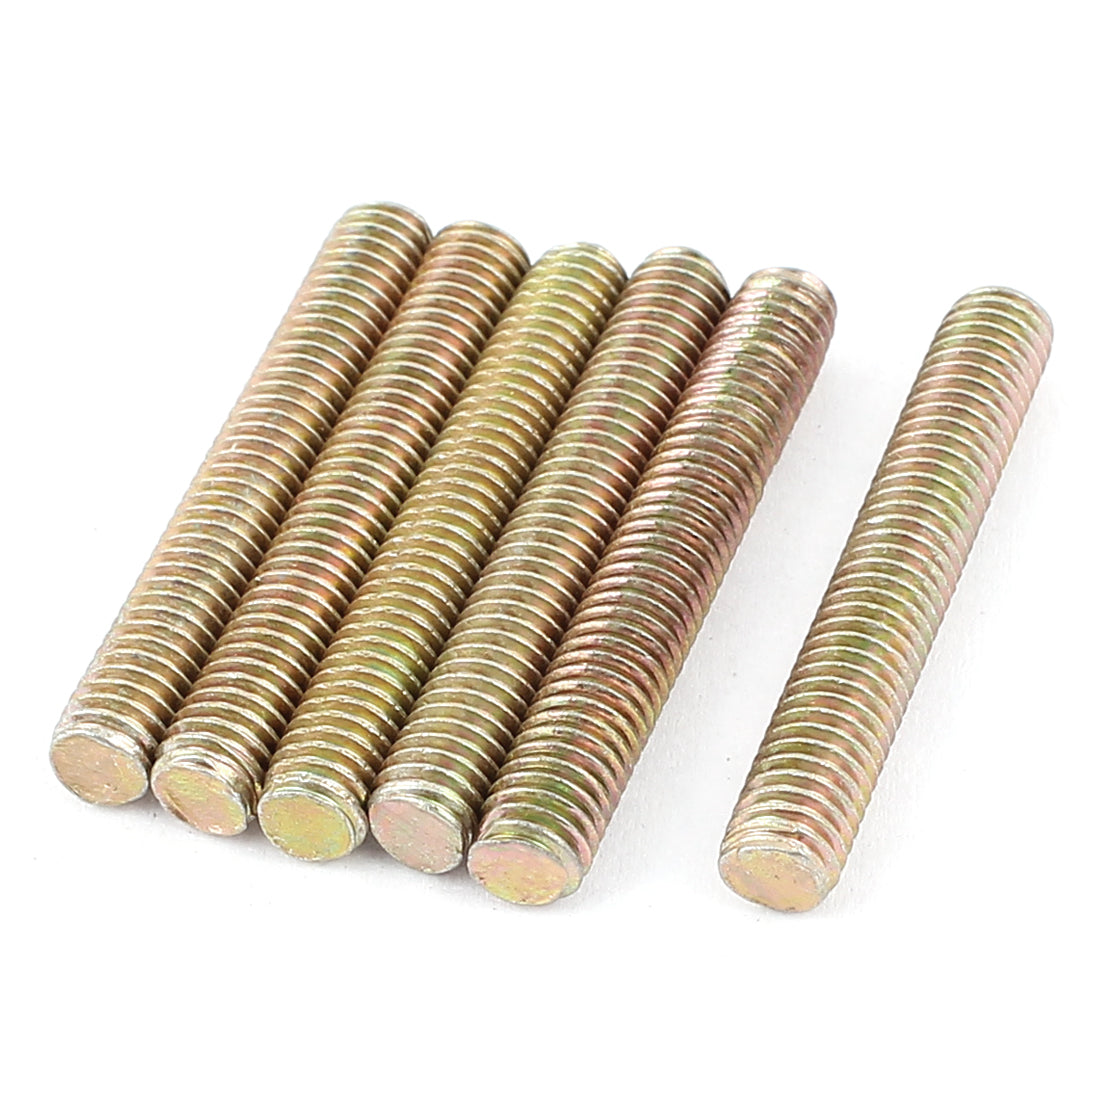 uxcell Uxcell 1mm Pitch M6 x 40mm Full Threaded Rod Bar Bronze Tone 6 Pcs